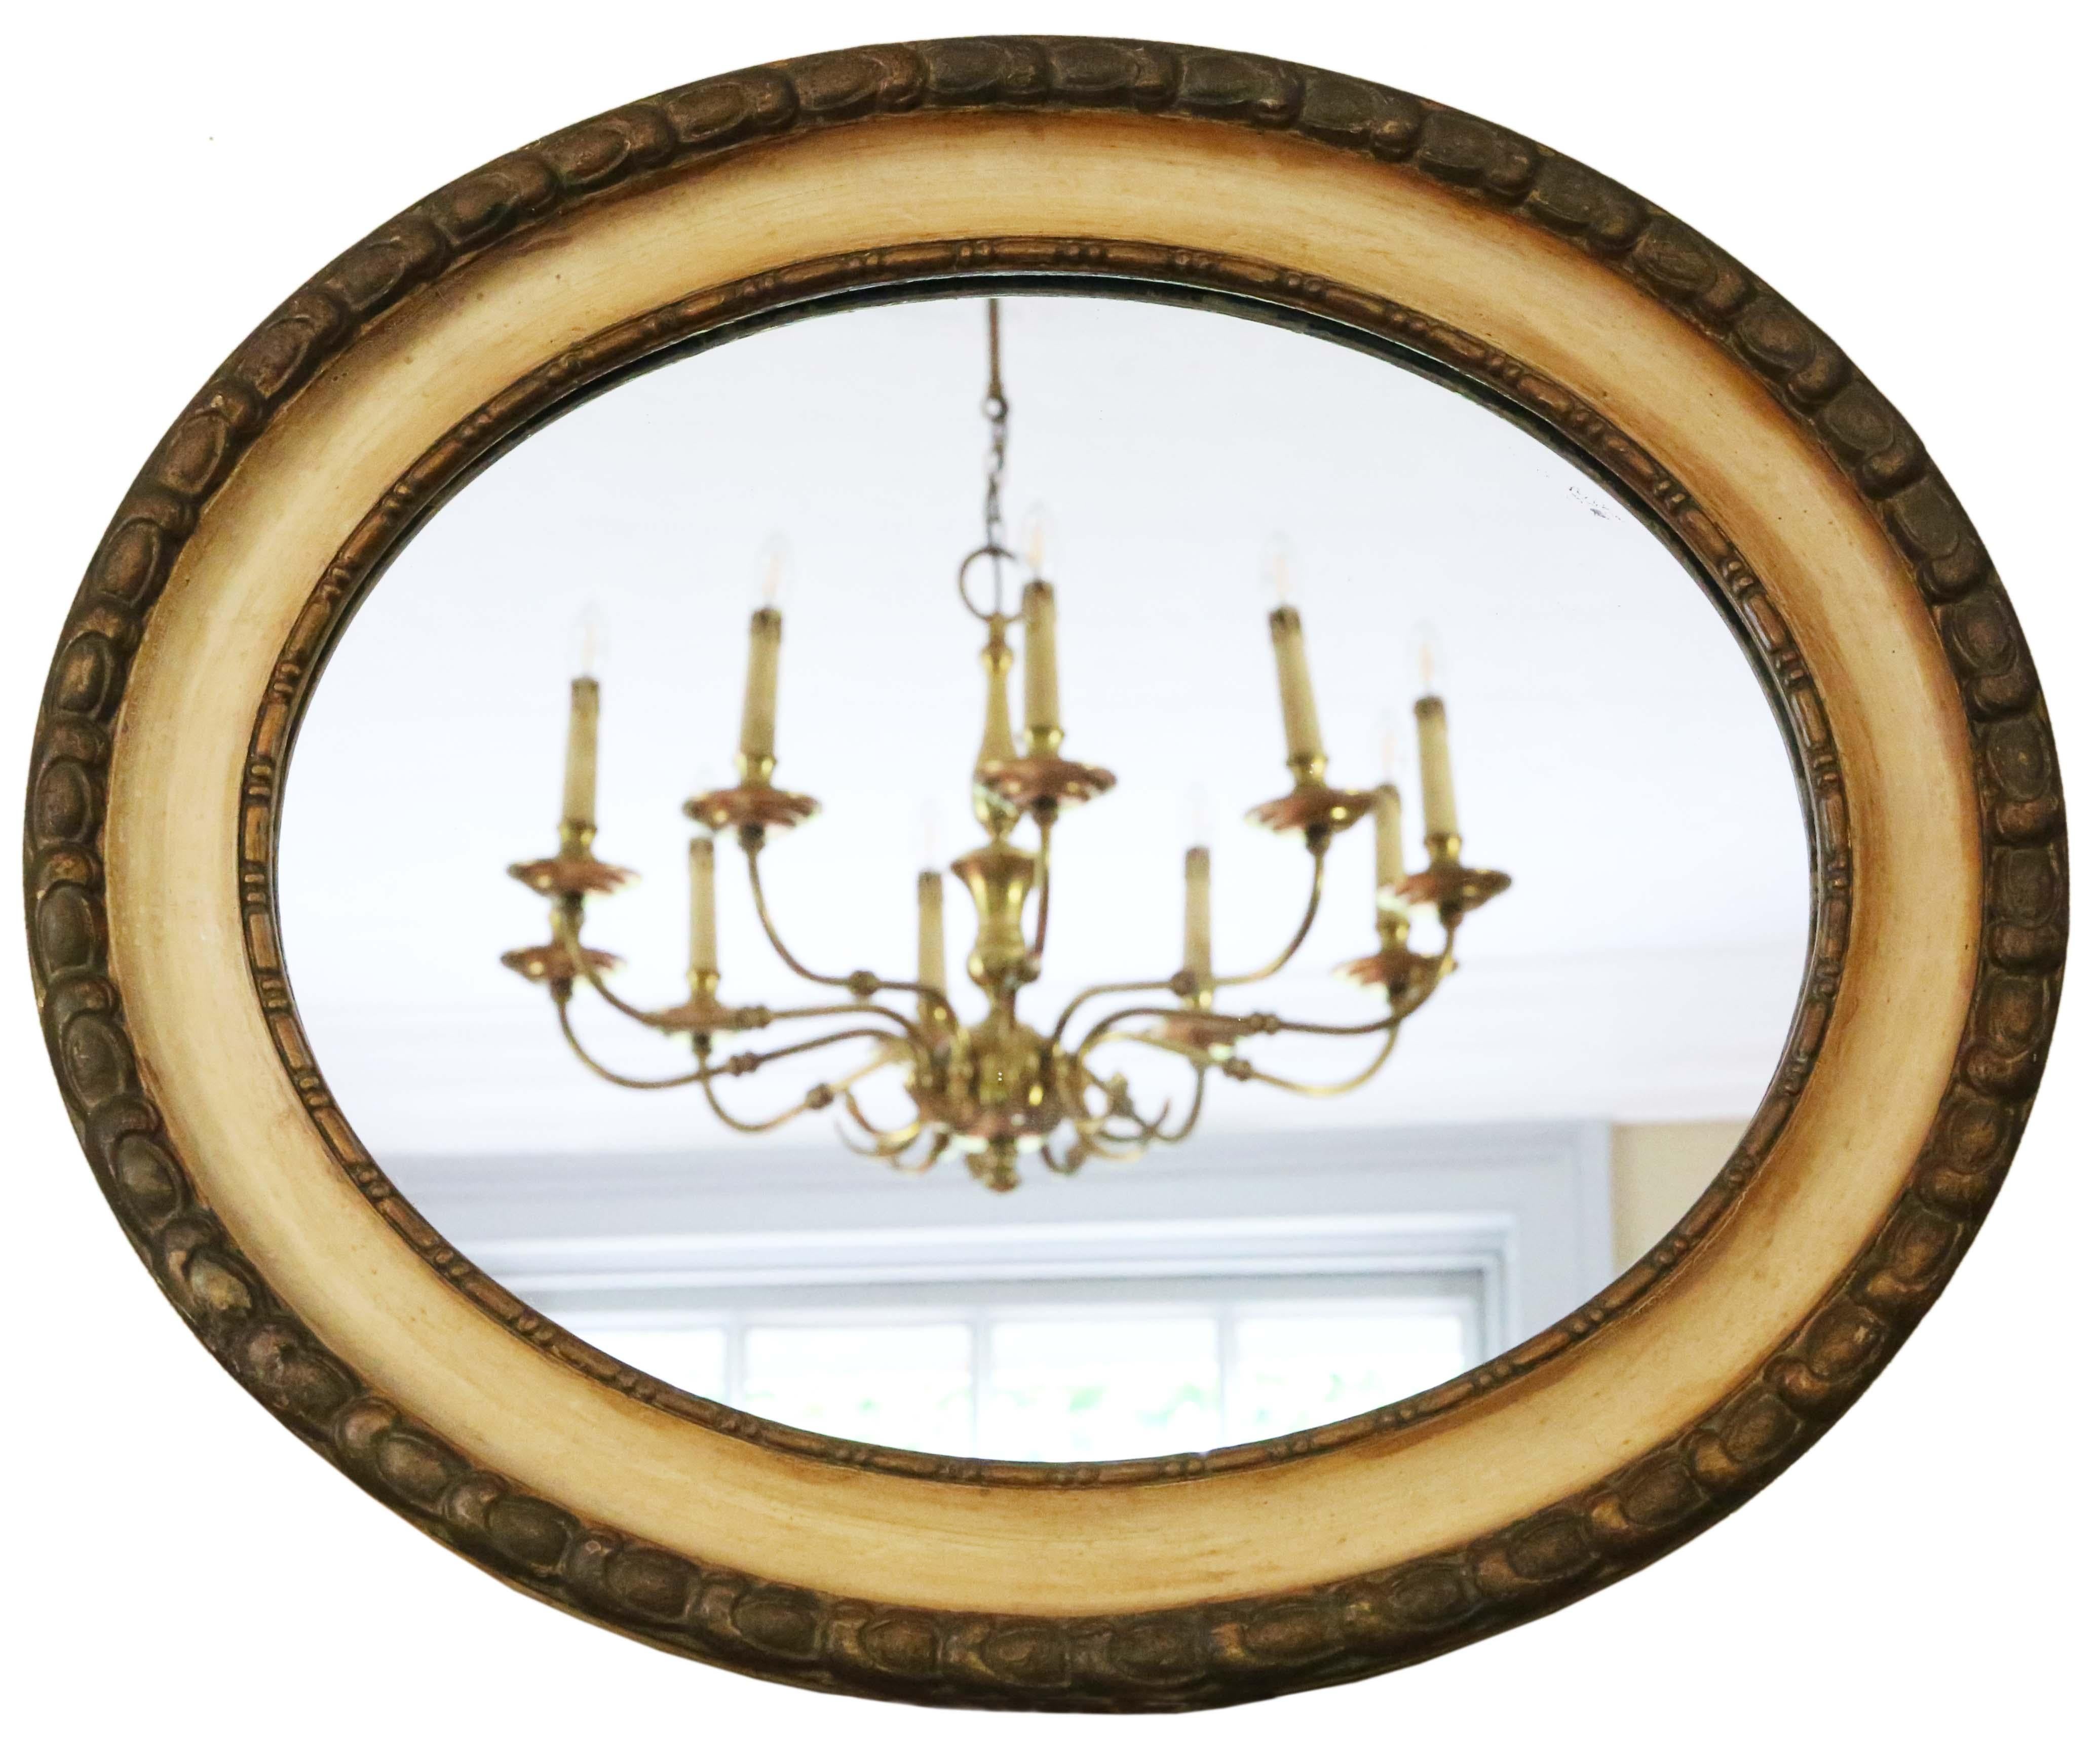 Antique quality oval gilt and cream overmantle wall mirror 19th Century.

An impressive rare find, that would look amazing in the right location. No loose joints or woodworm.

The mirrored glass has very light oxidation and age related